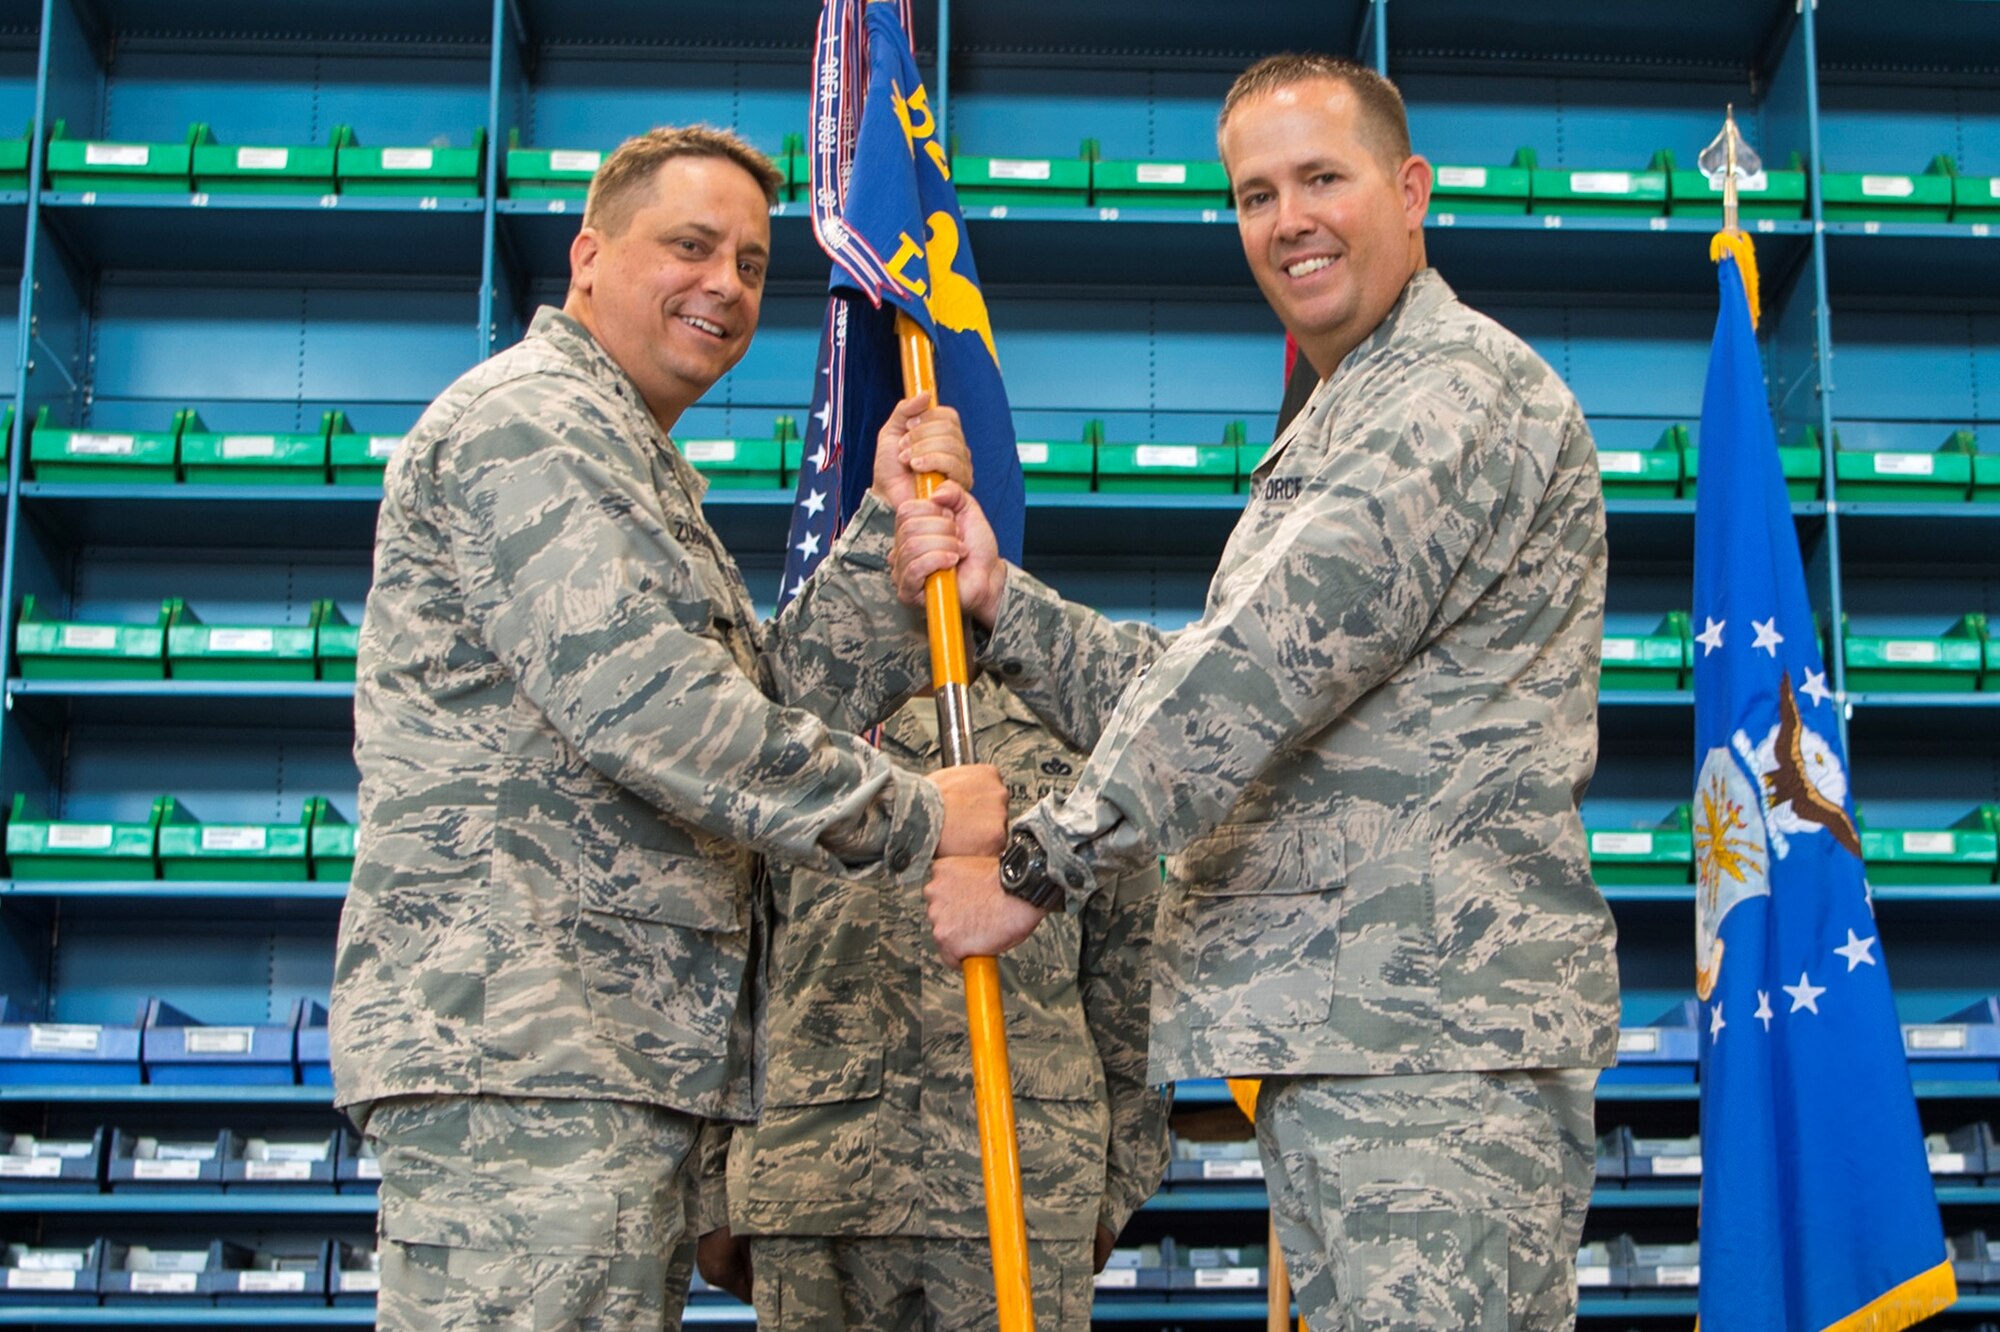 U.S. Air Force Col. Steven Zubowicz, 52nd Mission Support Group commander, left, gives the ceremonial guidon to U.S. Air Force Lt. Col. Timothy Foster, incoming 52nd Logistics Readiness Squadron commander, right, during the 52nd LRS change of command ceremony at Spangdahlem Air Base, Germany, July 7, 2017. (U.S. Air Force photo by Senior Airman Dawn Weber)